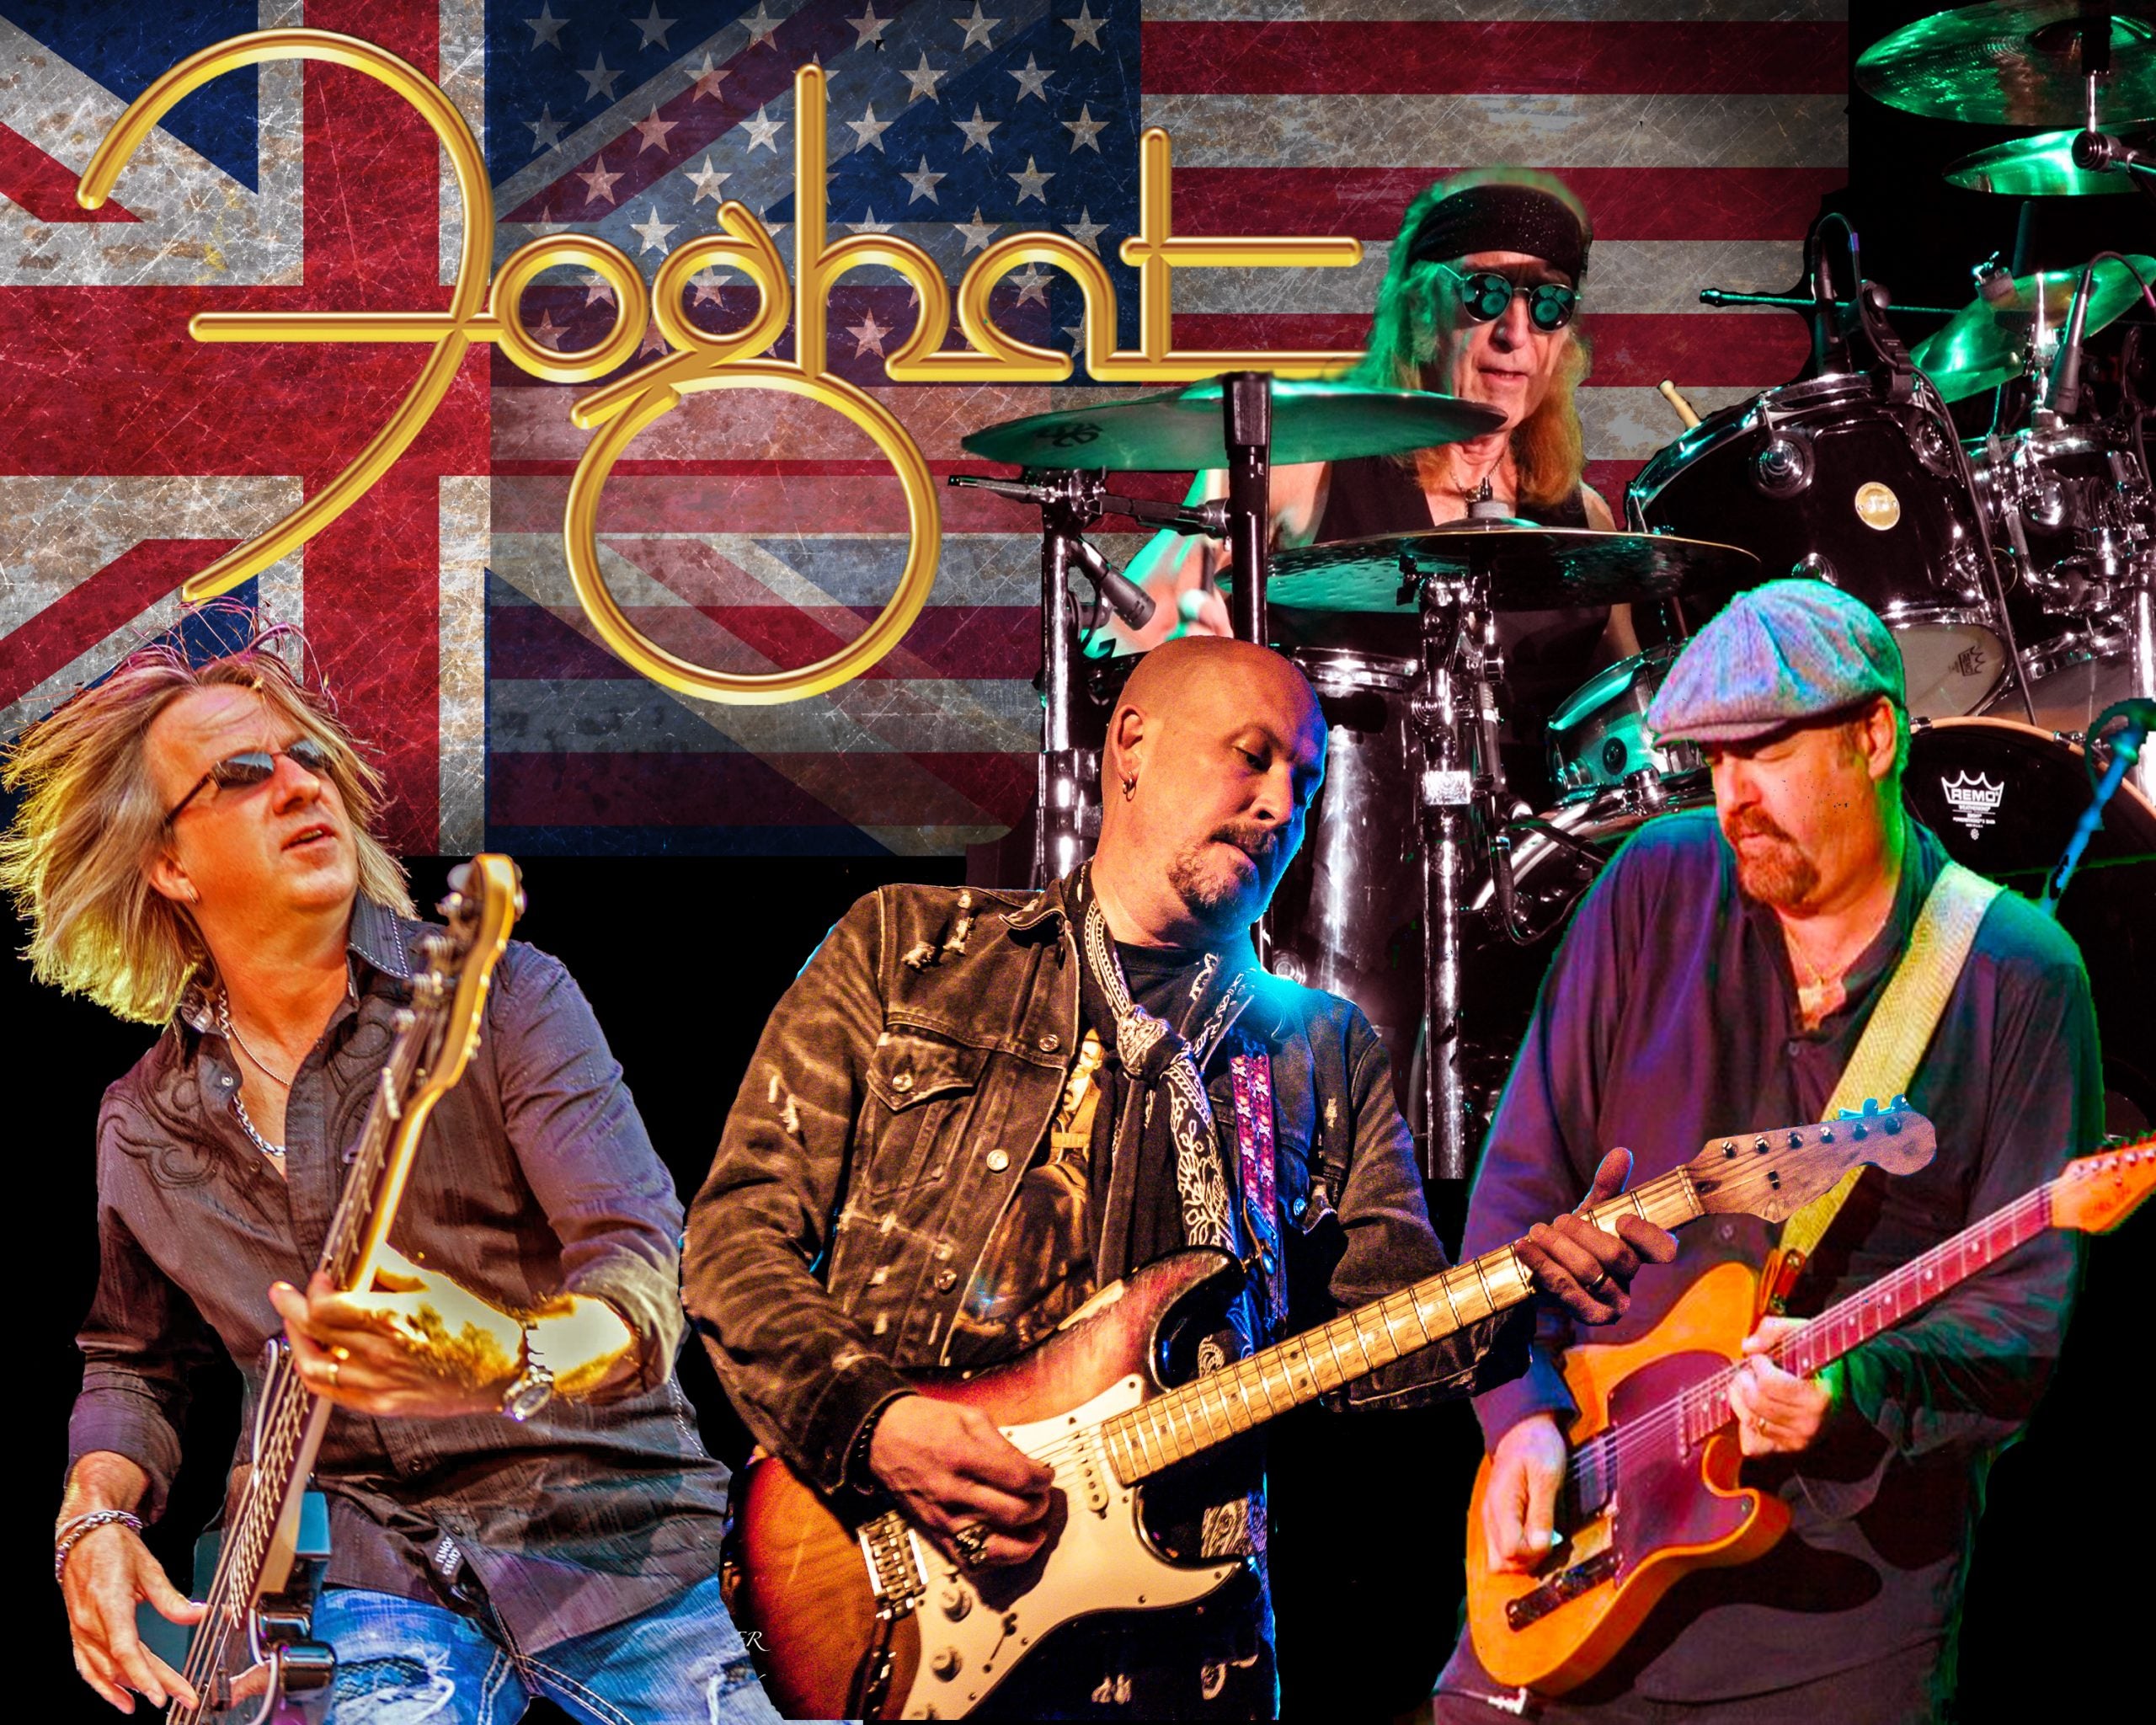 Foghat with Head East, Shooting Star and Missouri in Saint Charles promo photo for Official Platinum Onsale presale offer code